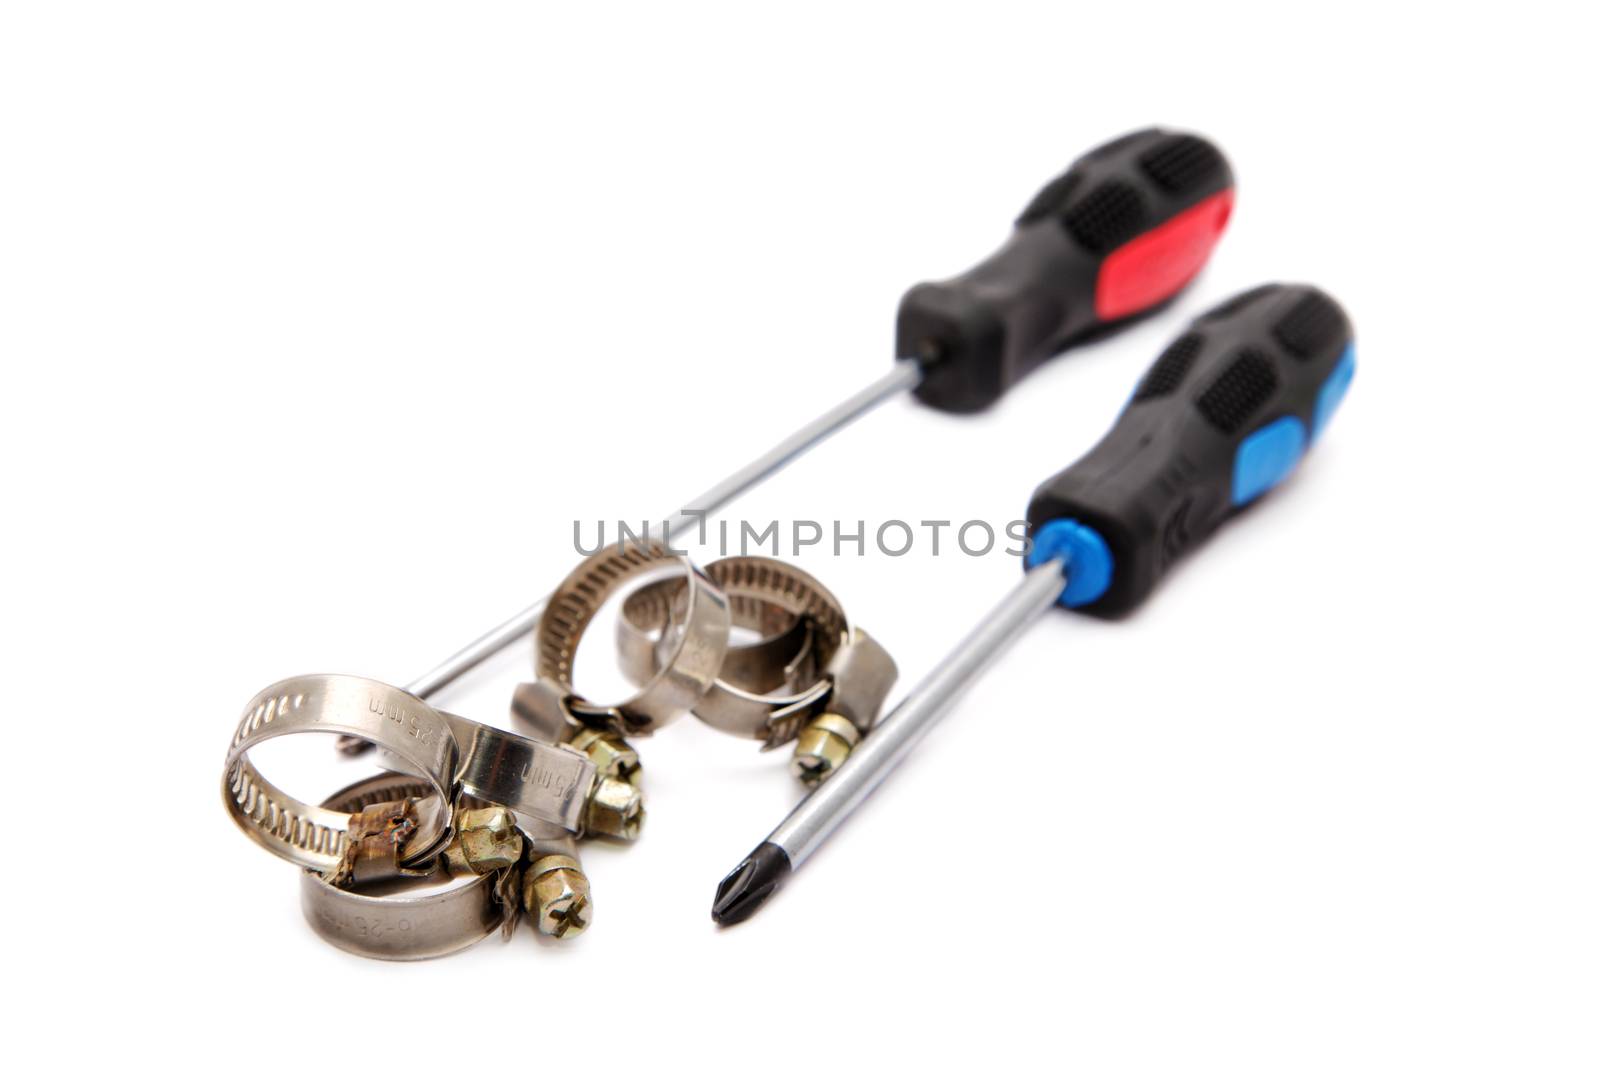 Screw-drivers and screw collars isolated on a white background